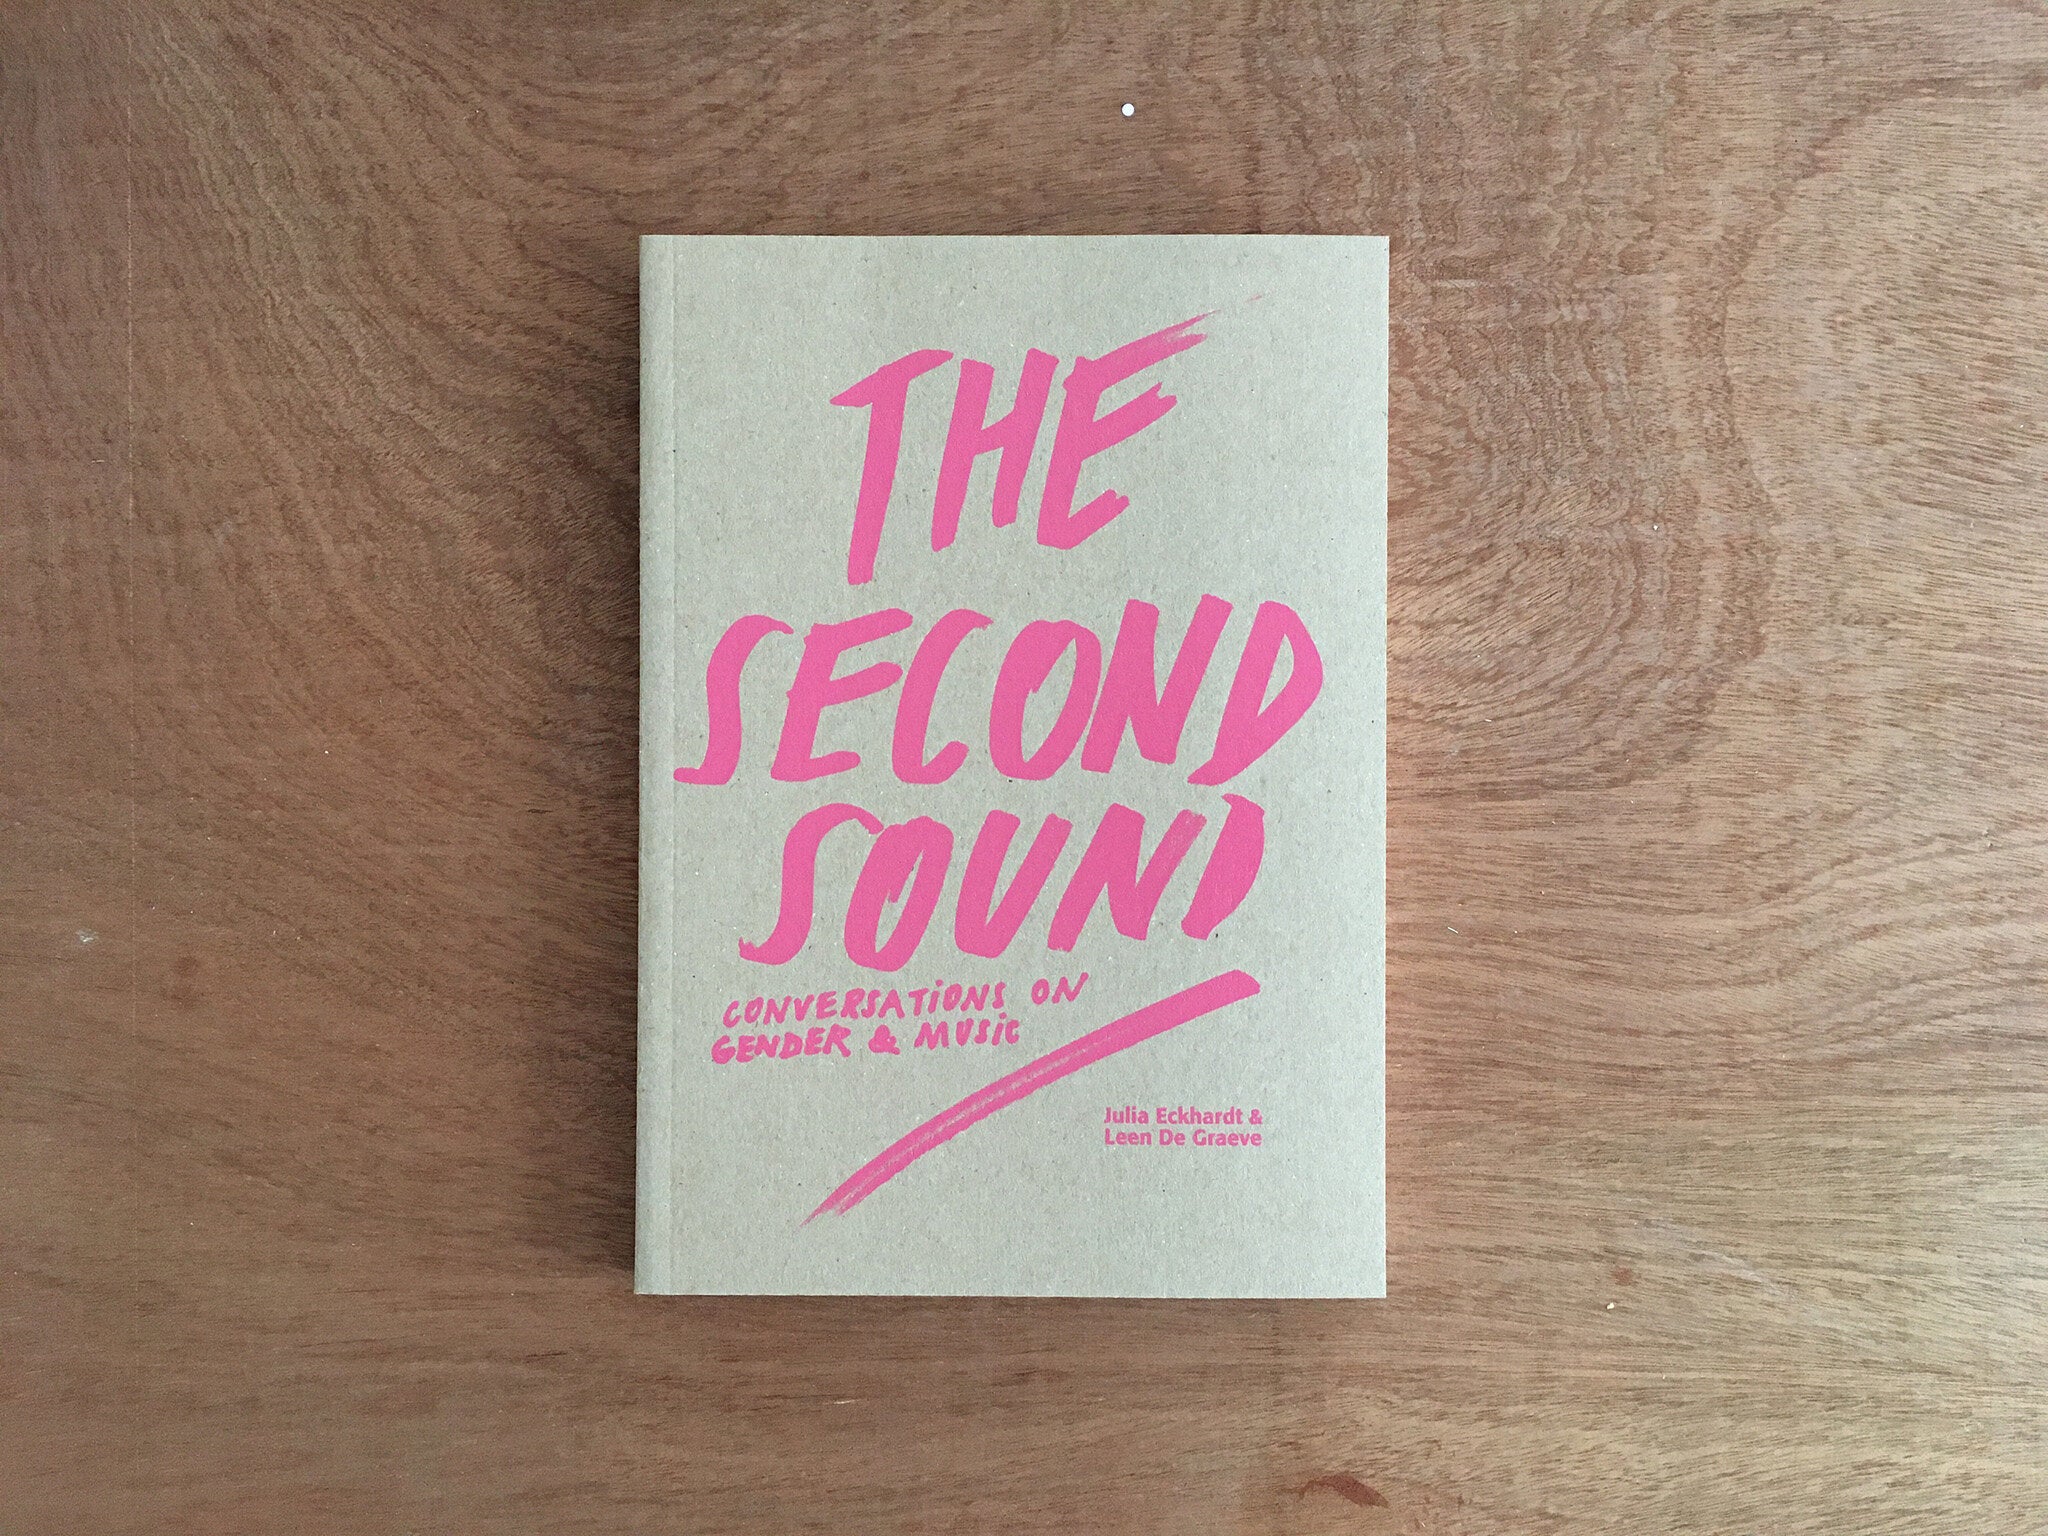 THE SECOND SOUND: CONVERSATIONS ON GENDER AND MUSIC edited by Julia Eckhardt and Leen De Graeve